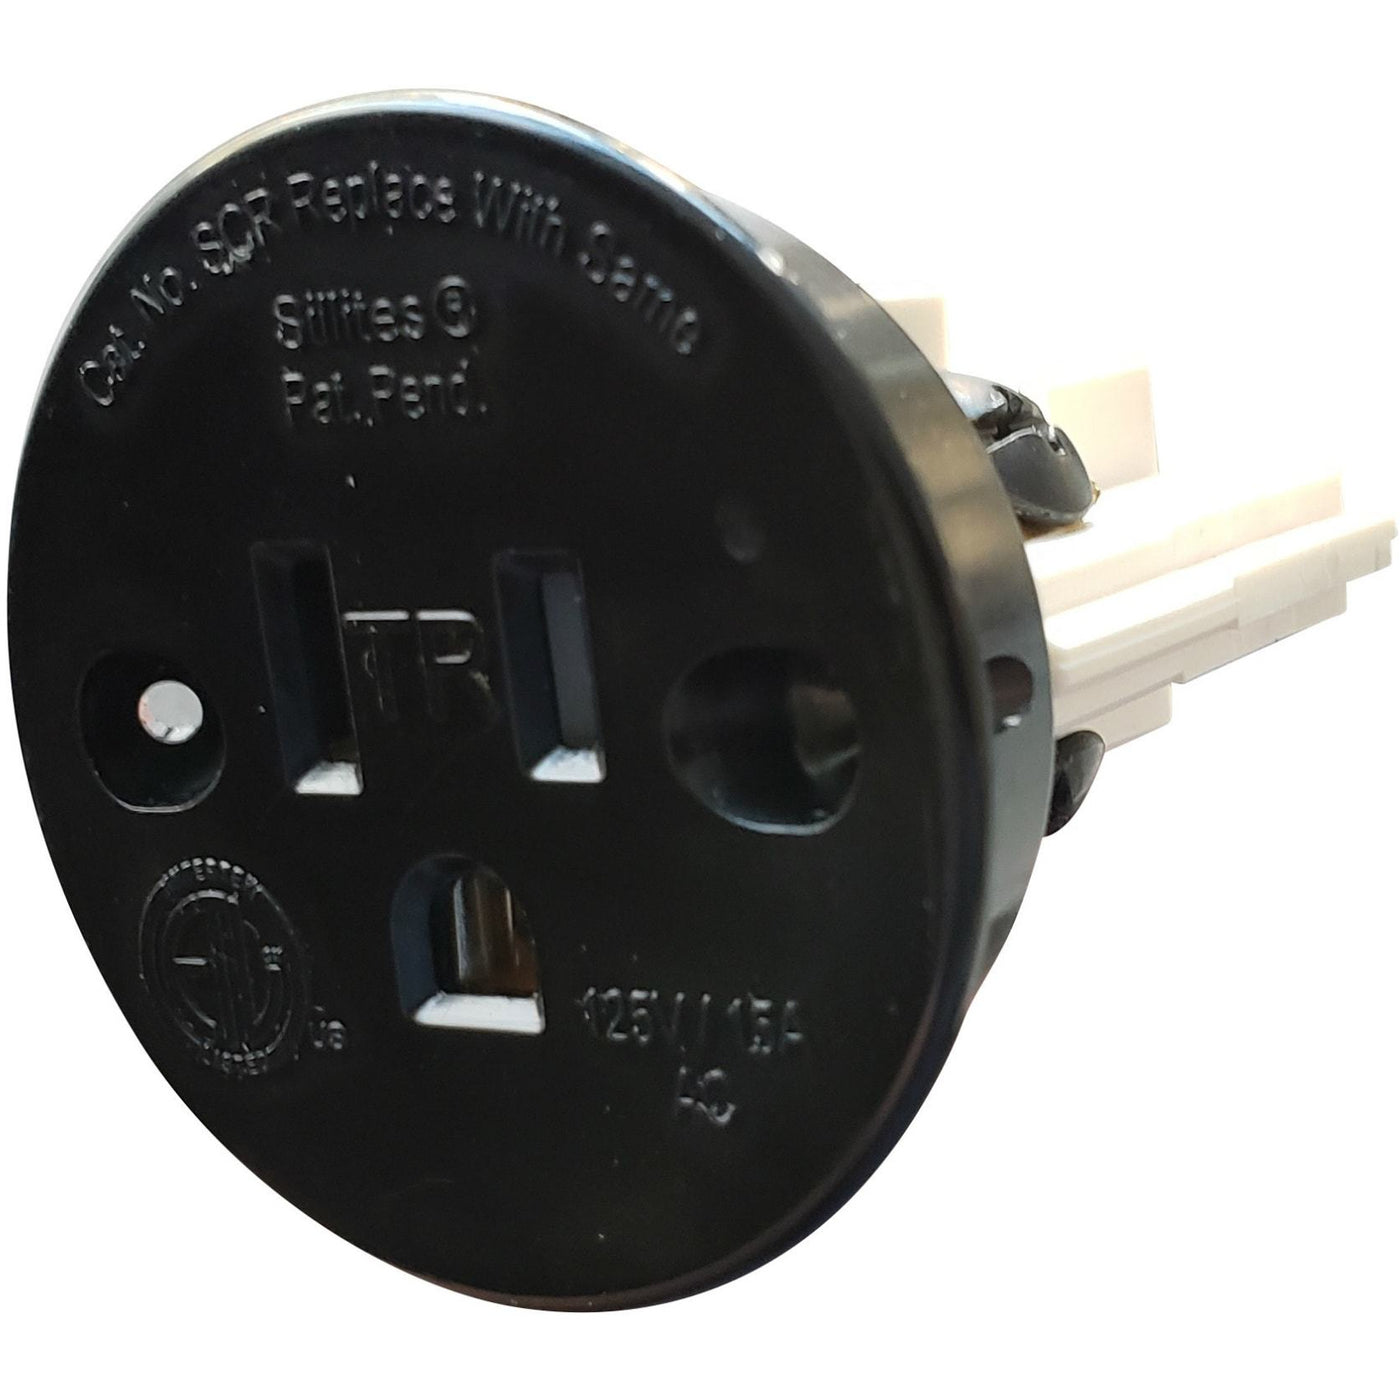 120 Volt Outlet [Everything You Need To Know]